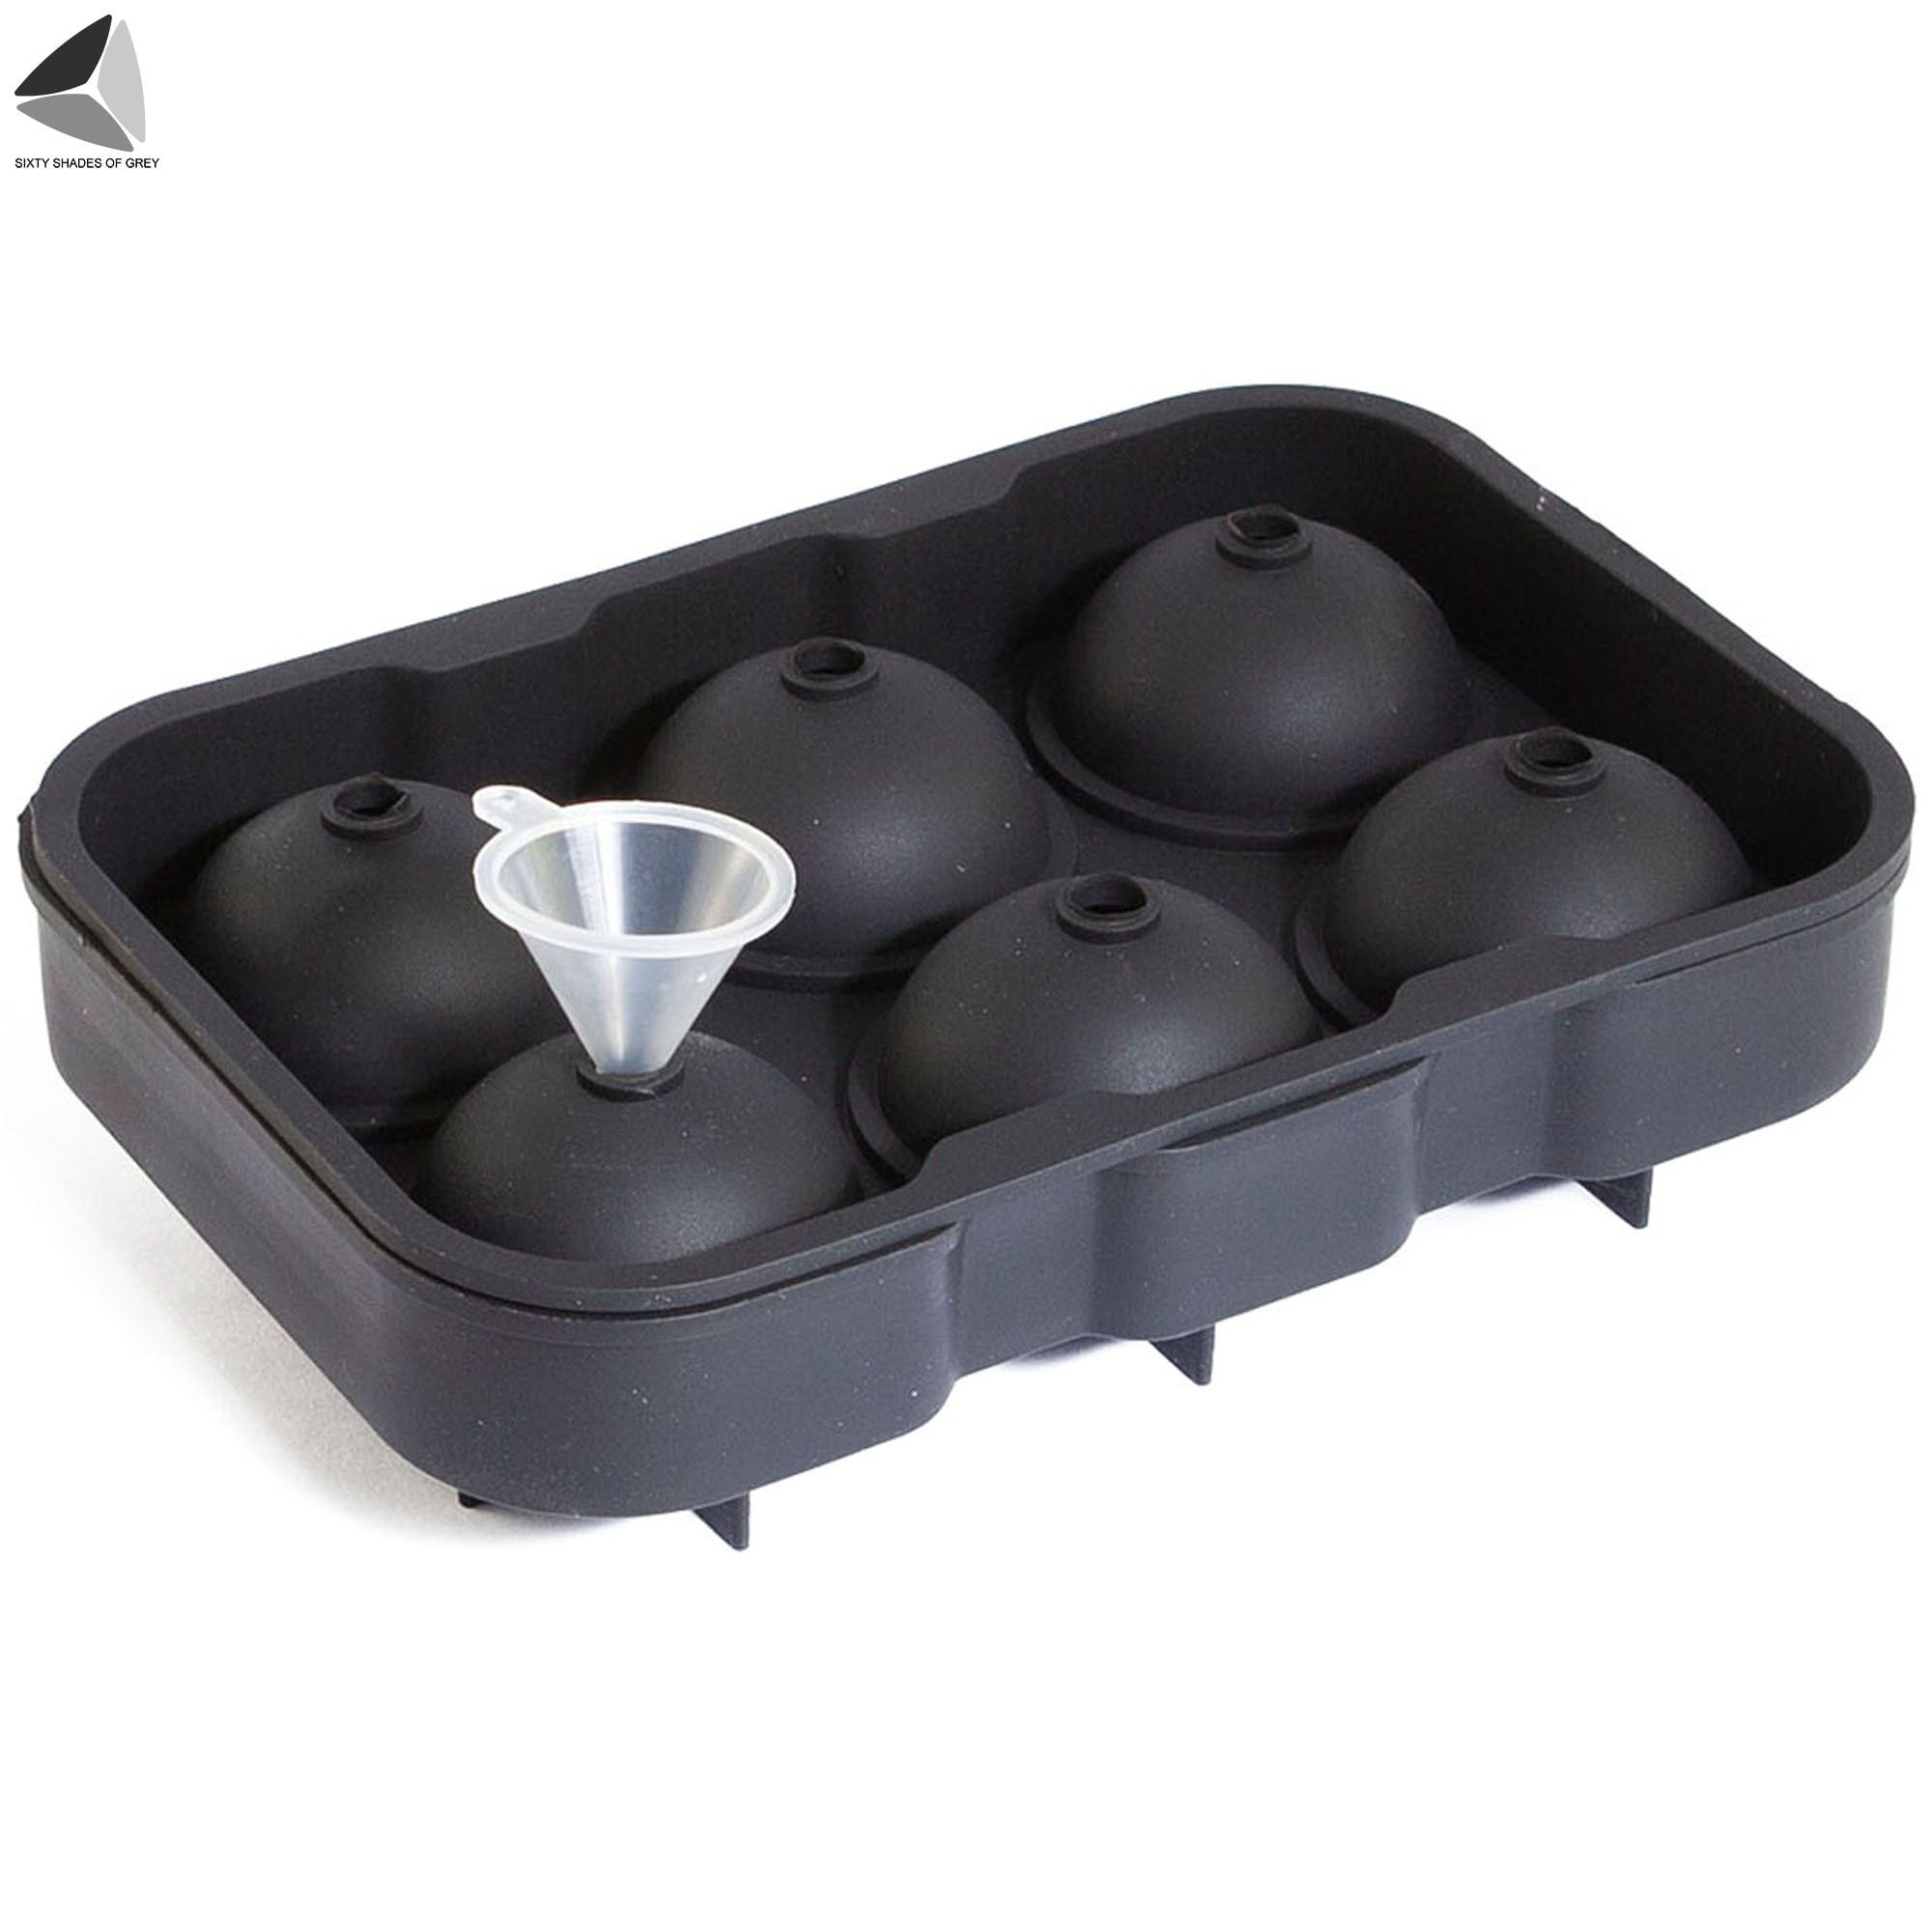 Webake Golf Ball Ice Molds with Lid & Funnel 6 Holes Round Sphere Ice